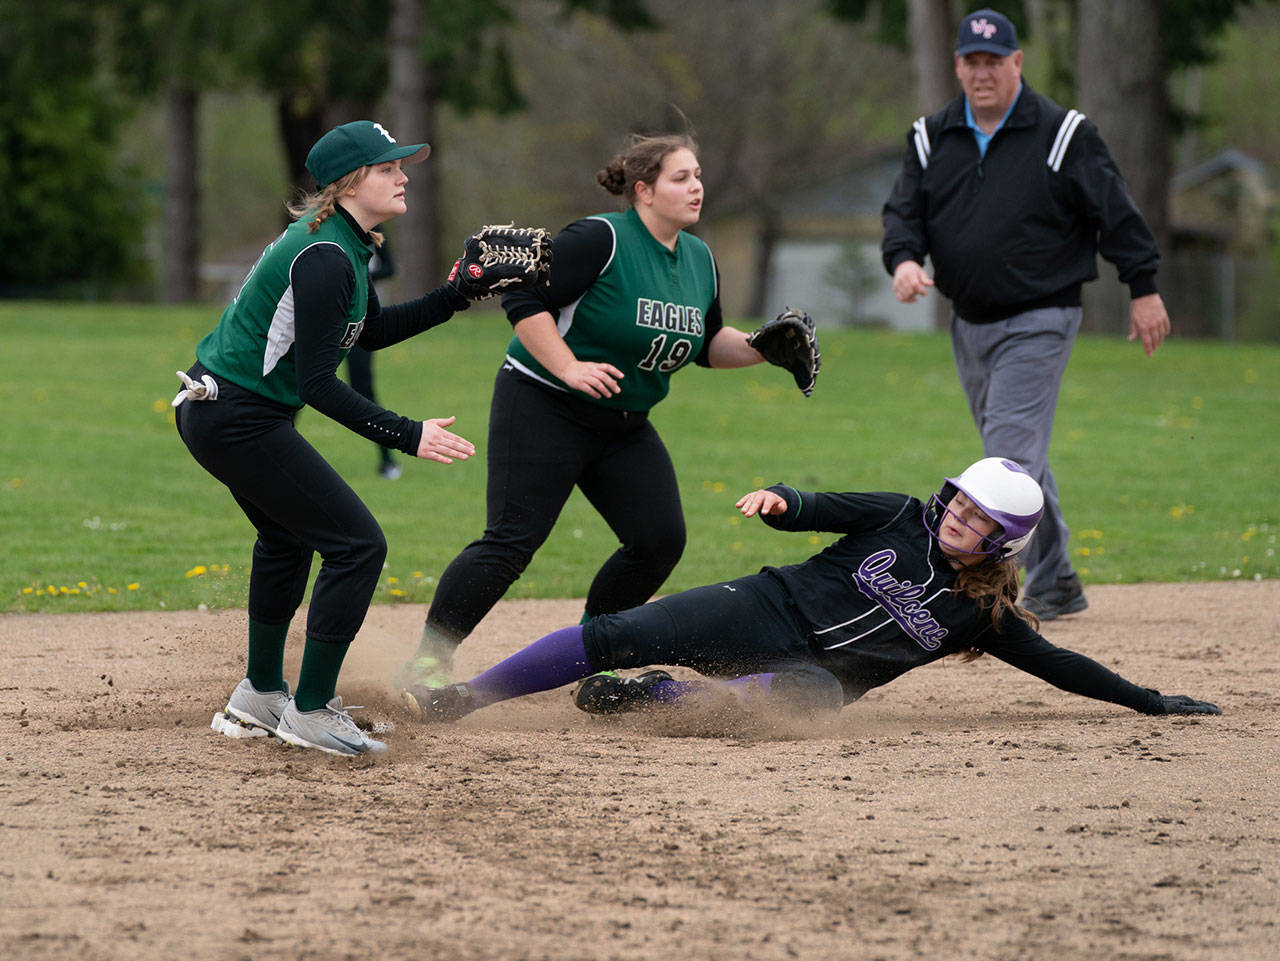 Quilcene’s Madison Coffey steals second base ahead of the throw to Evergreen Lutheran’s Lyndsey Lee and Olivia Baker, 19, during a game in Qulcene on Friday. (Steve Mullensky/for Peninsula Daily News)